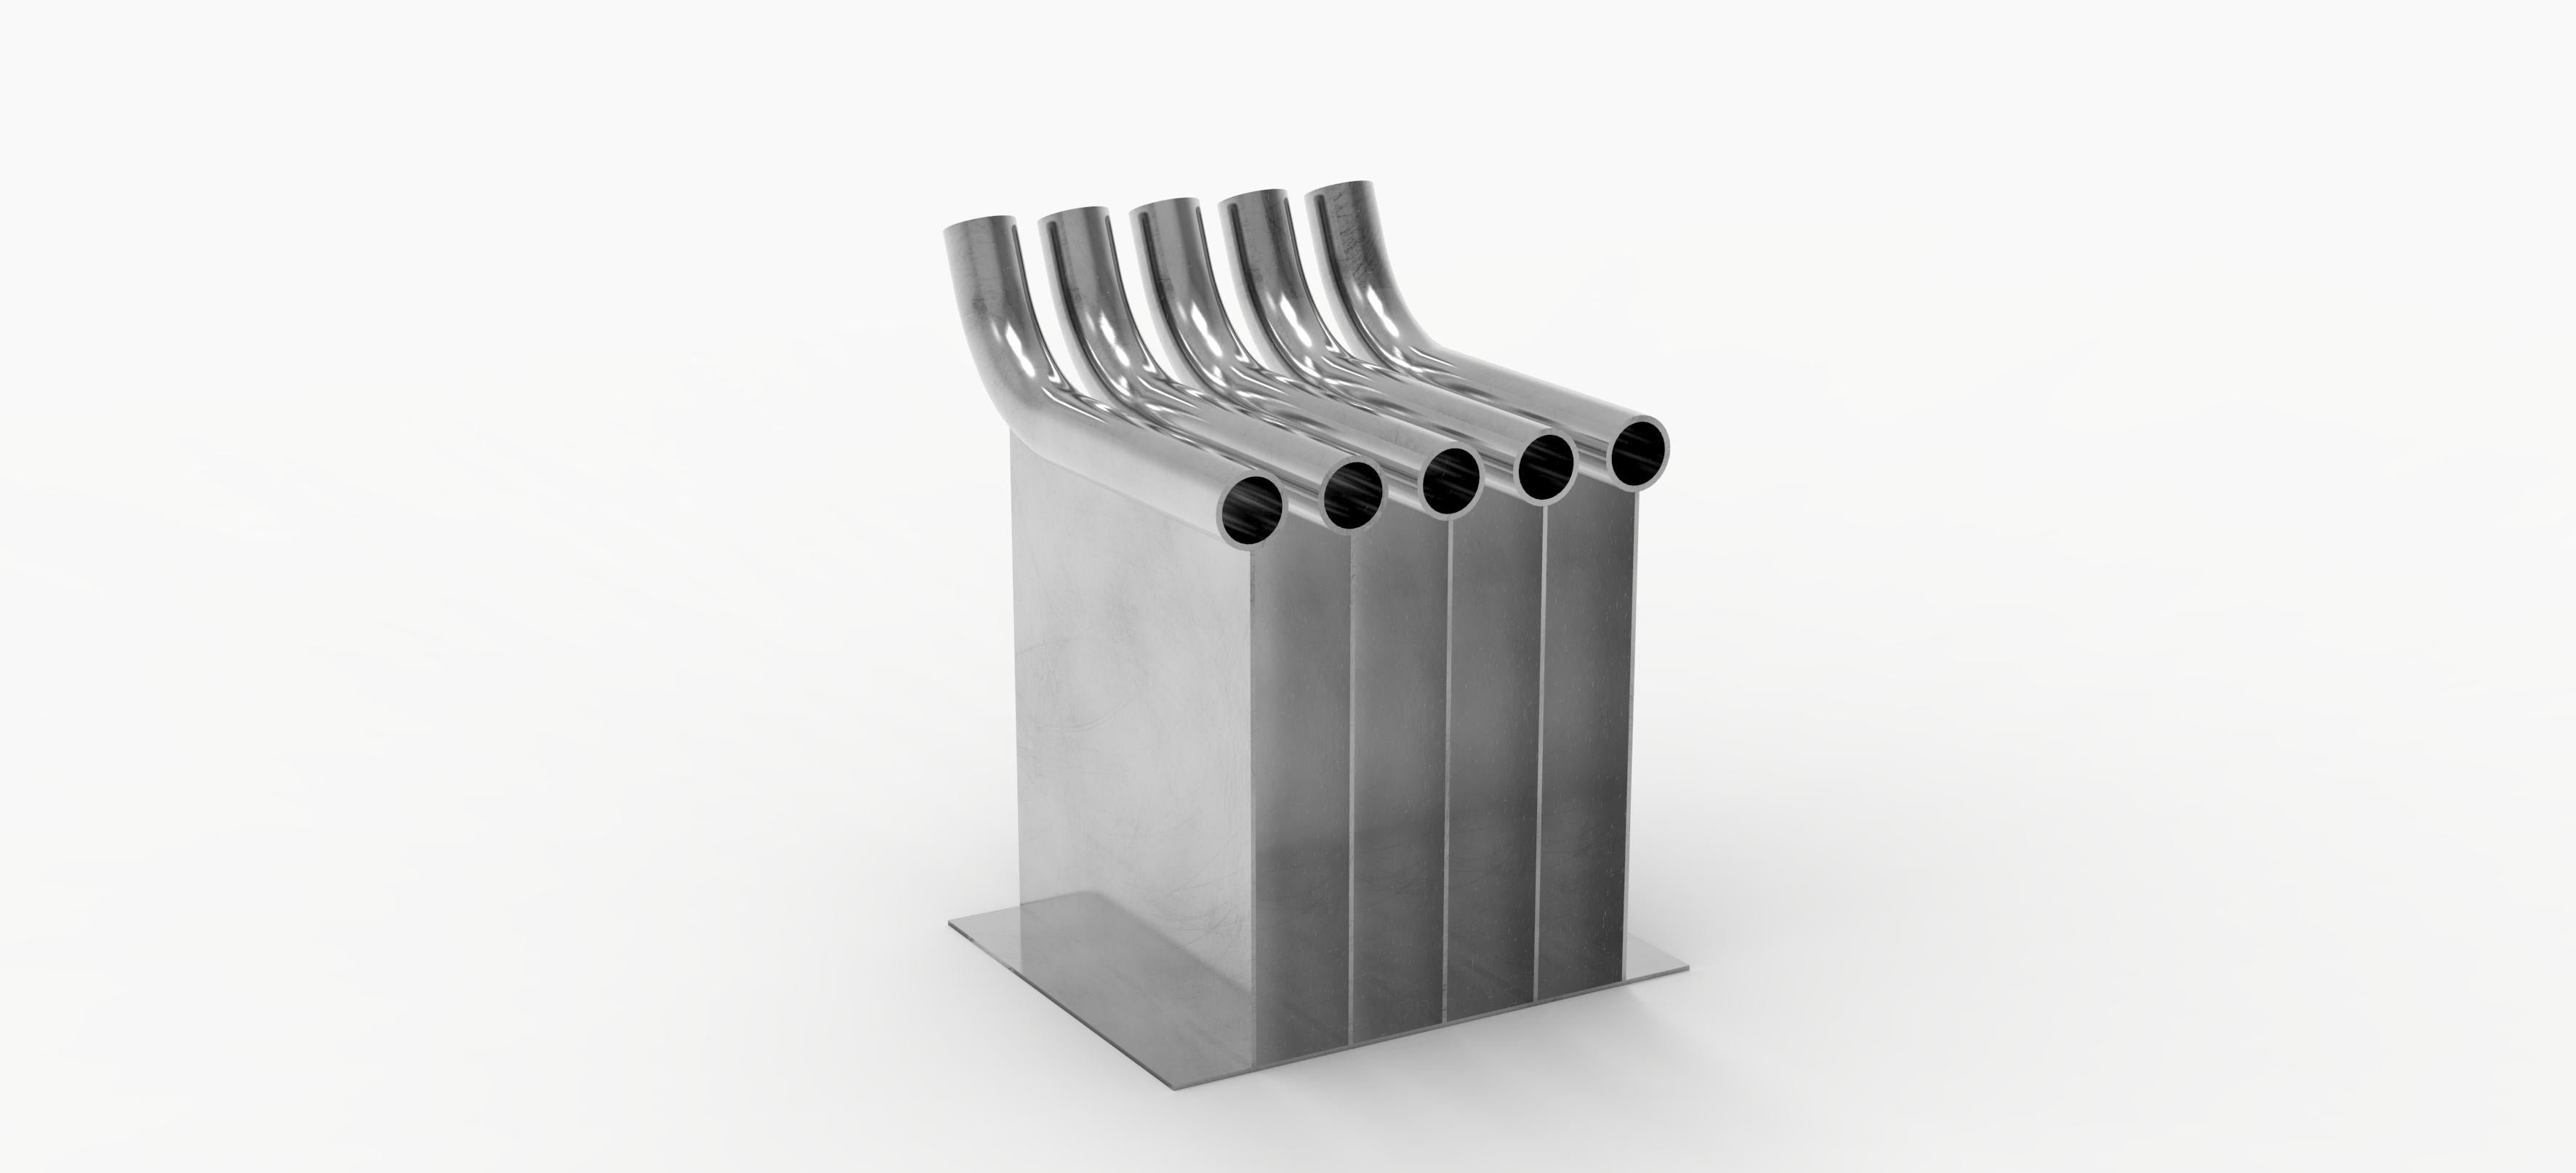 Pipes silver stool by Neil Nenner and Avihai Mizrahi 
Objects 
Dimensions: H 47 x L 47 x W 58 cm
Materials: iron

Avihai Mizrahi (b. 1979, Jerusalem), Independent designer / Artist and lecturer in visual communication, holds a B.des in visual